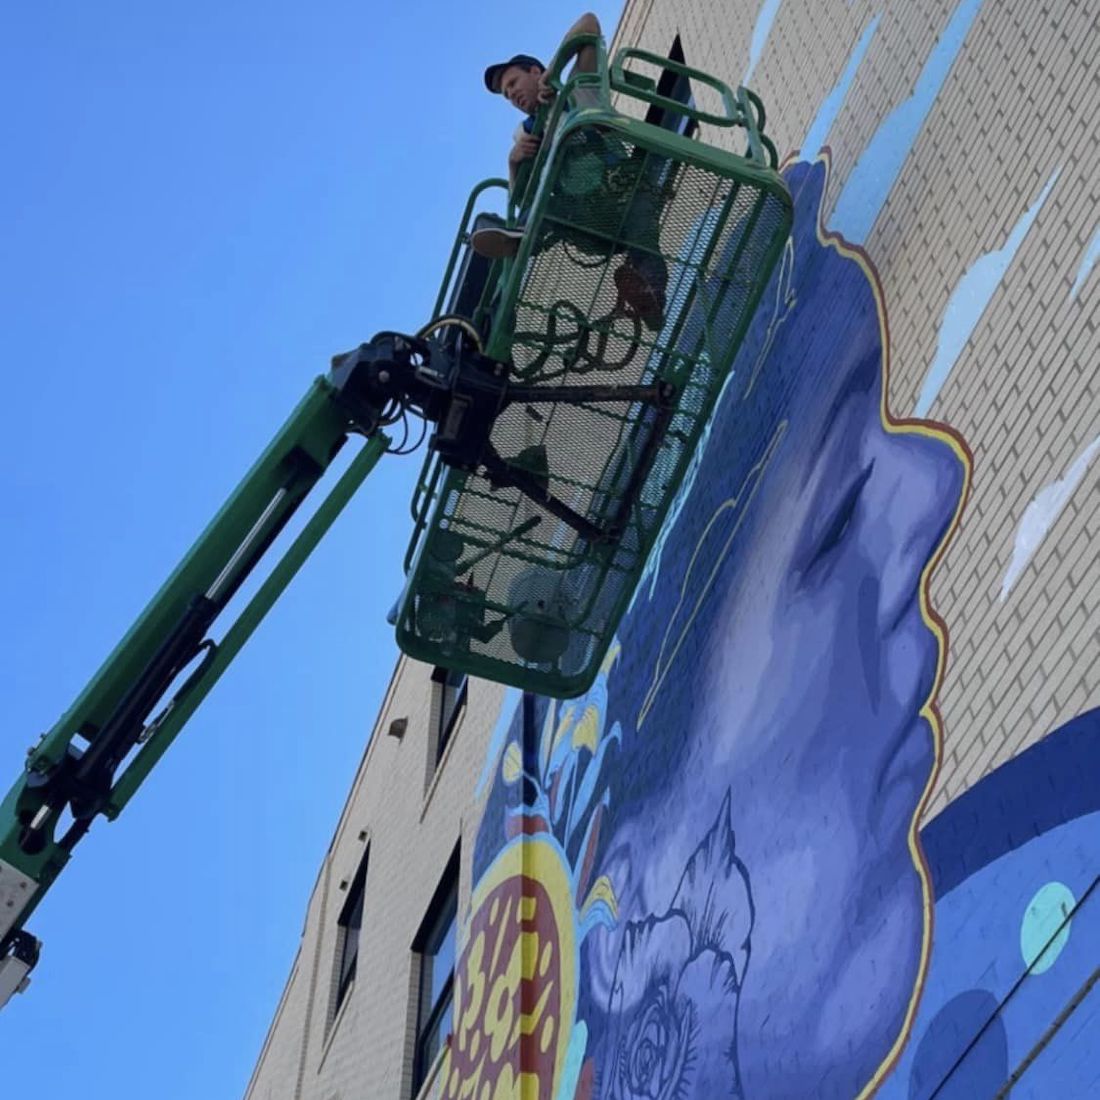 An artist stands on a cherry picker looking down. A light brick wall is behind him, adorned with a large portrait mural